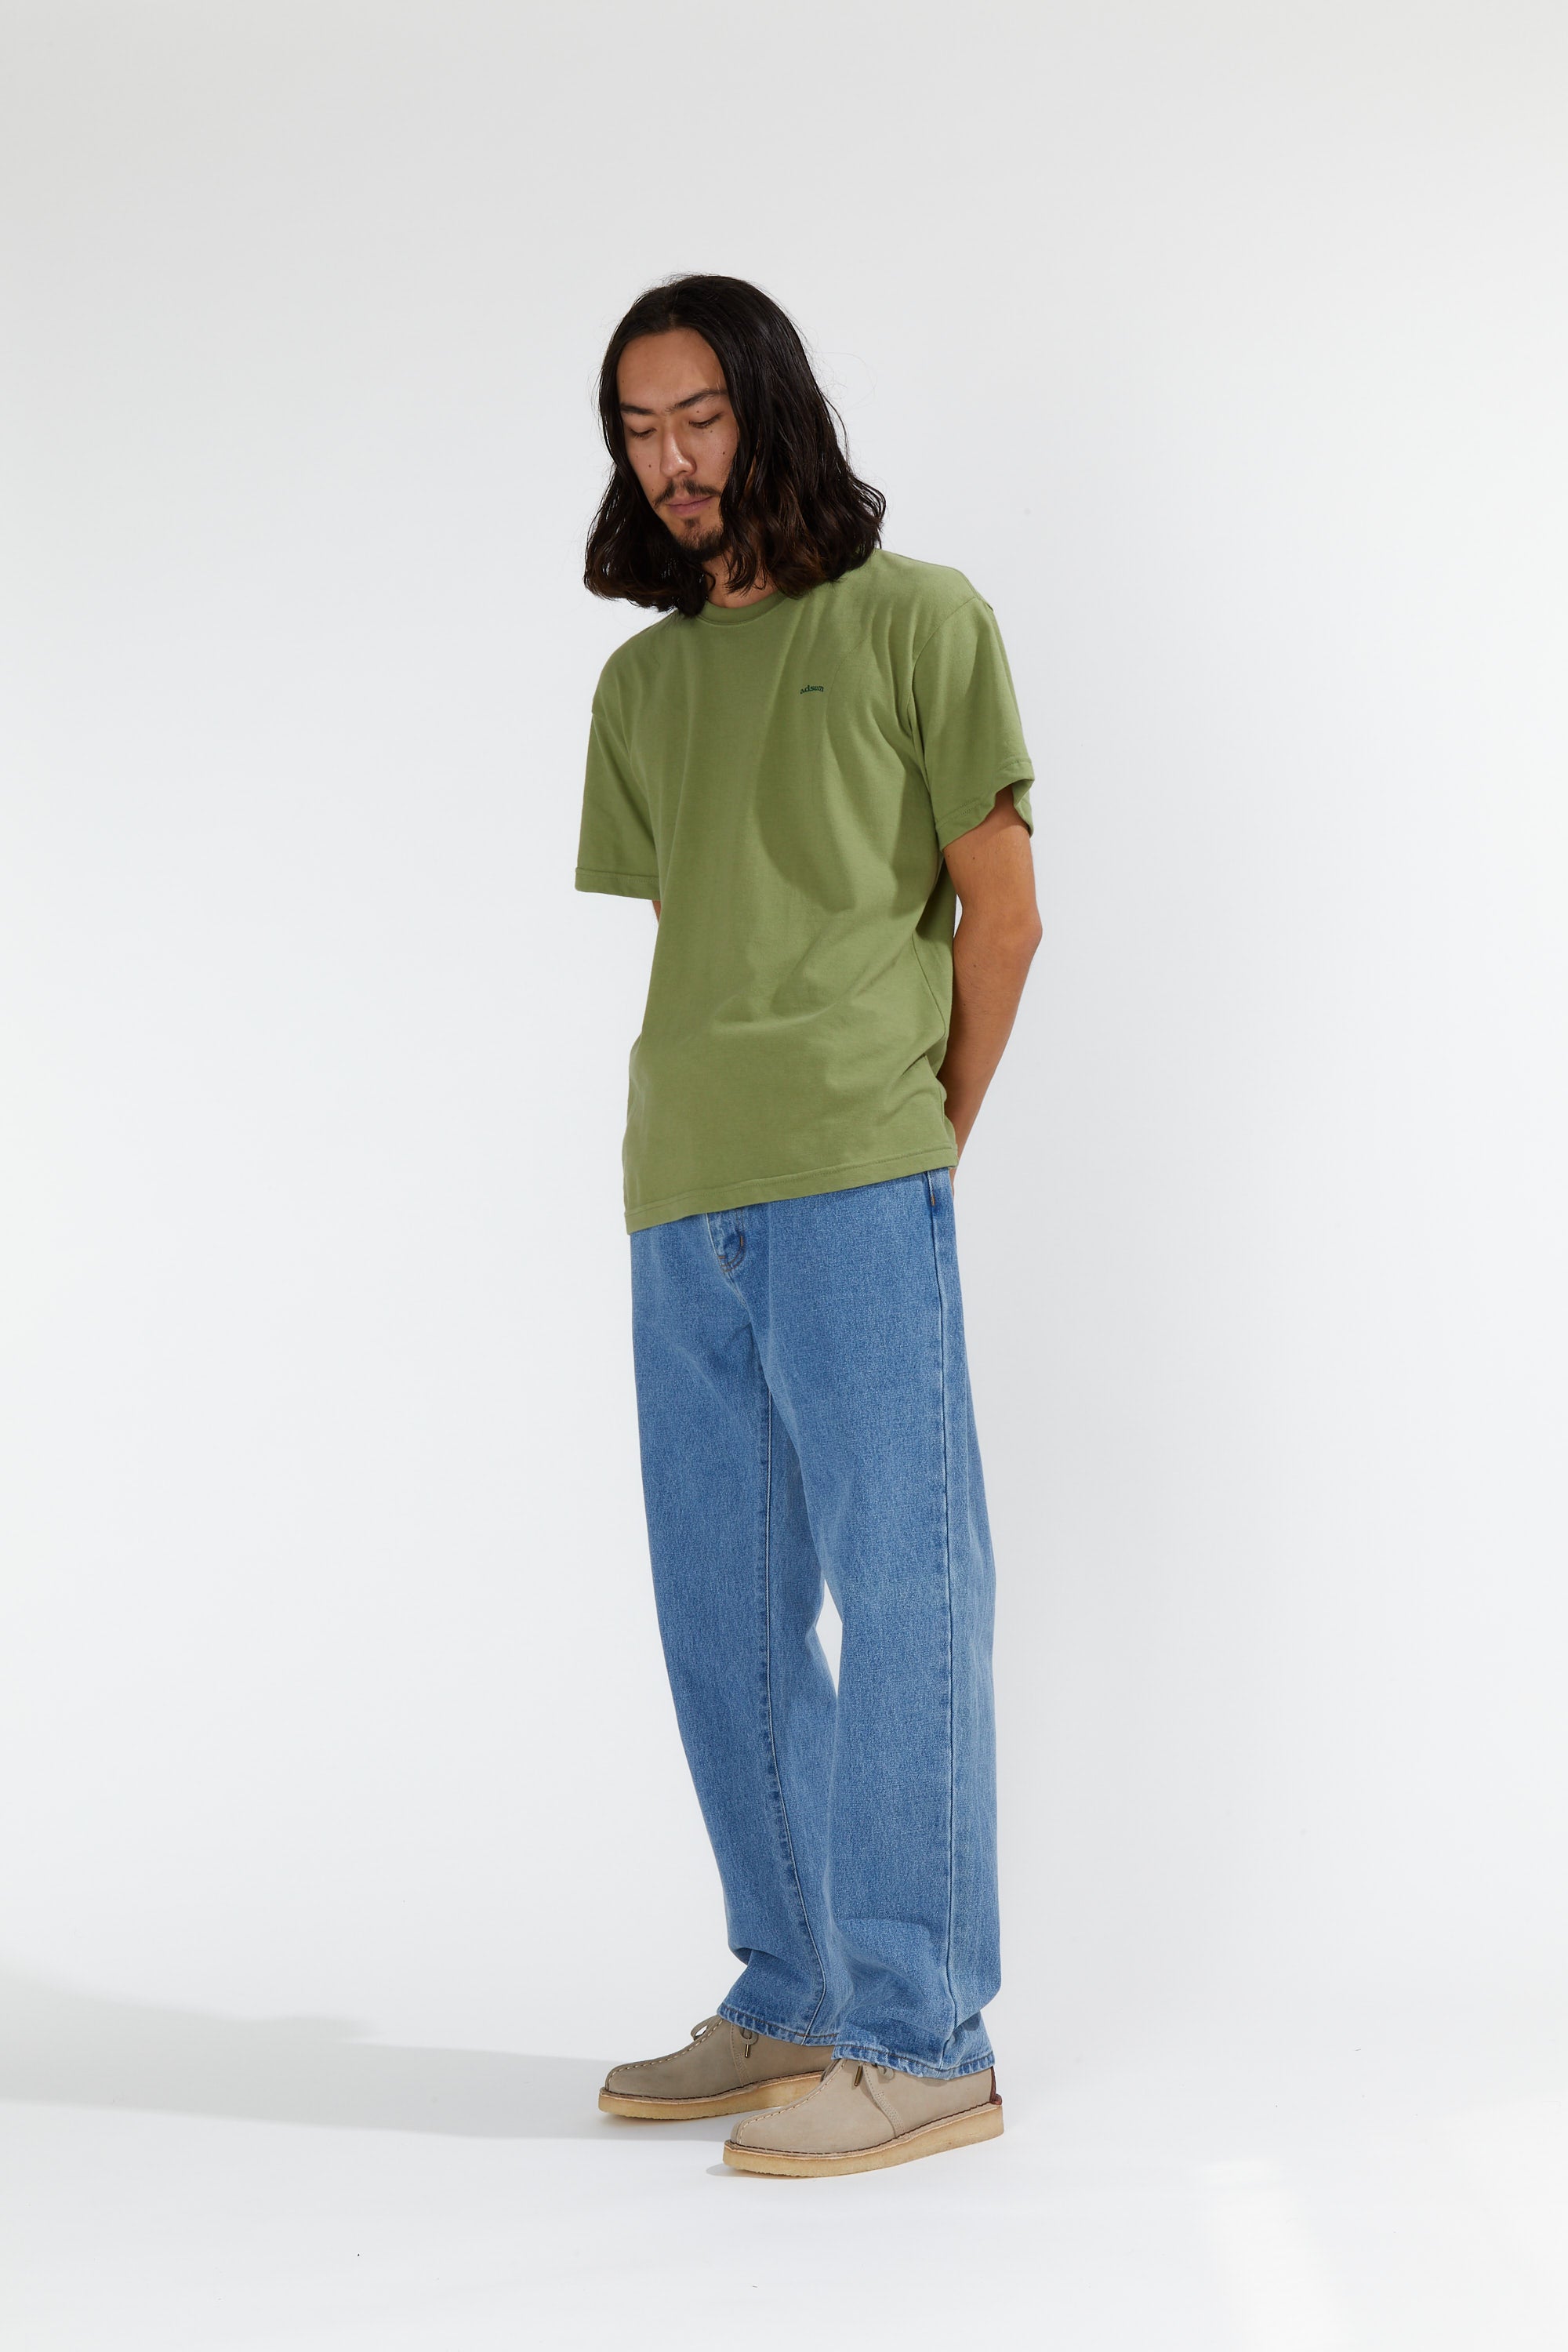 Relaxed Fit 5-Pocket Jean - Bleach Stone Wash / Adsum